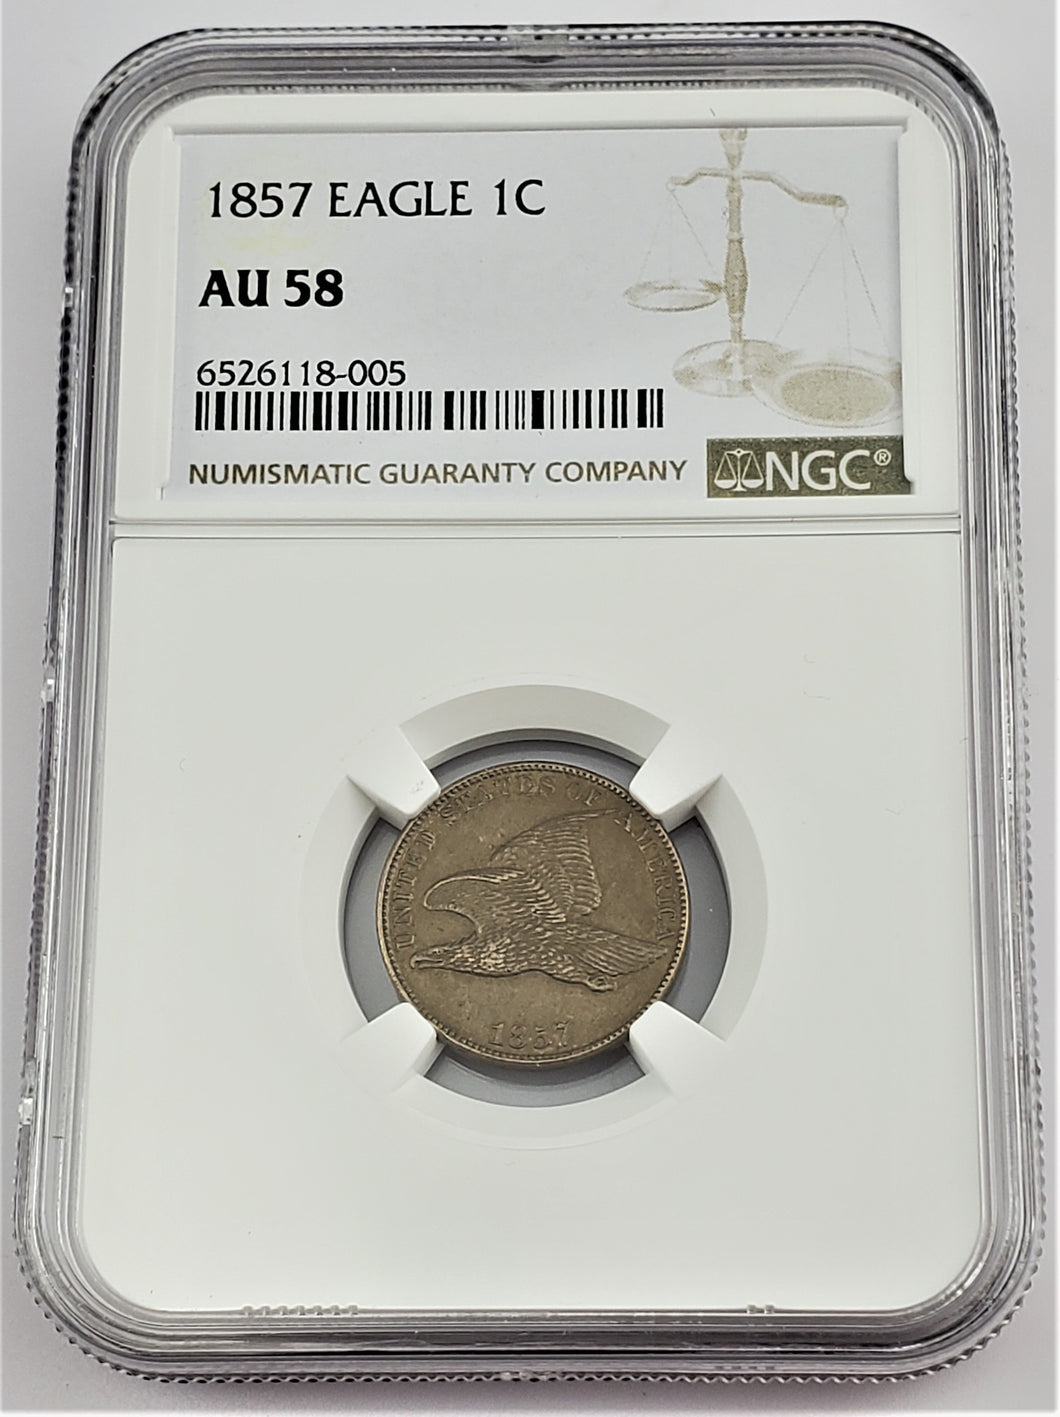 1857 P Flying Eagle 1c Cent / Penney NGC AU 58 U.S Coin